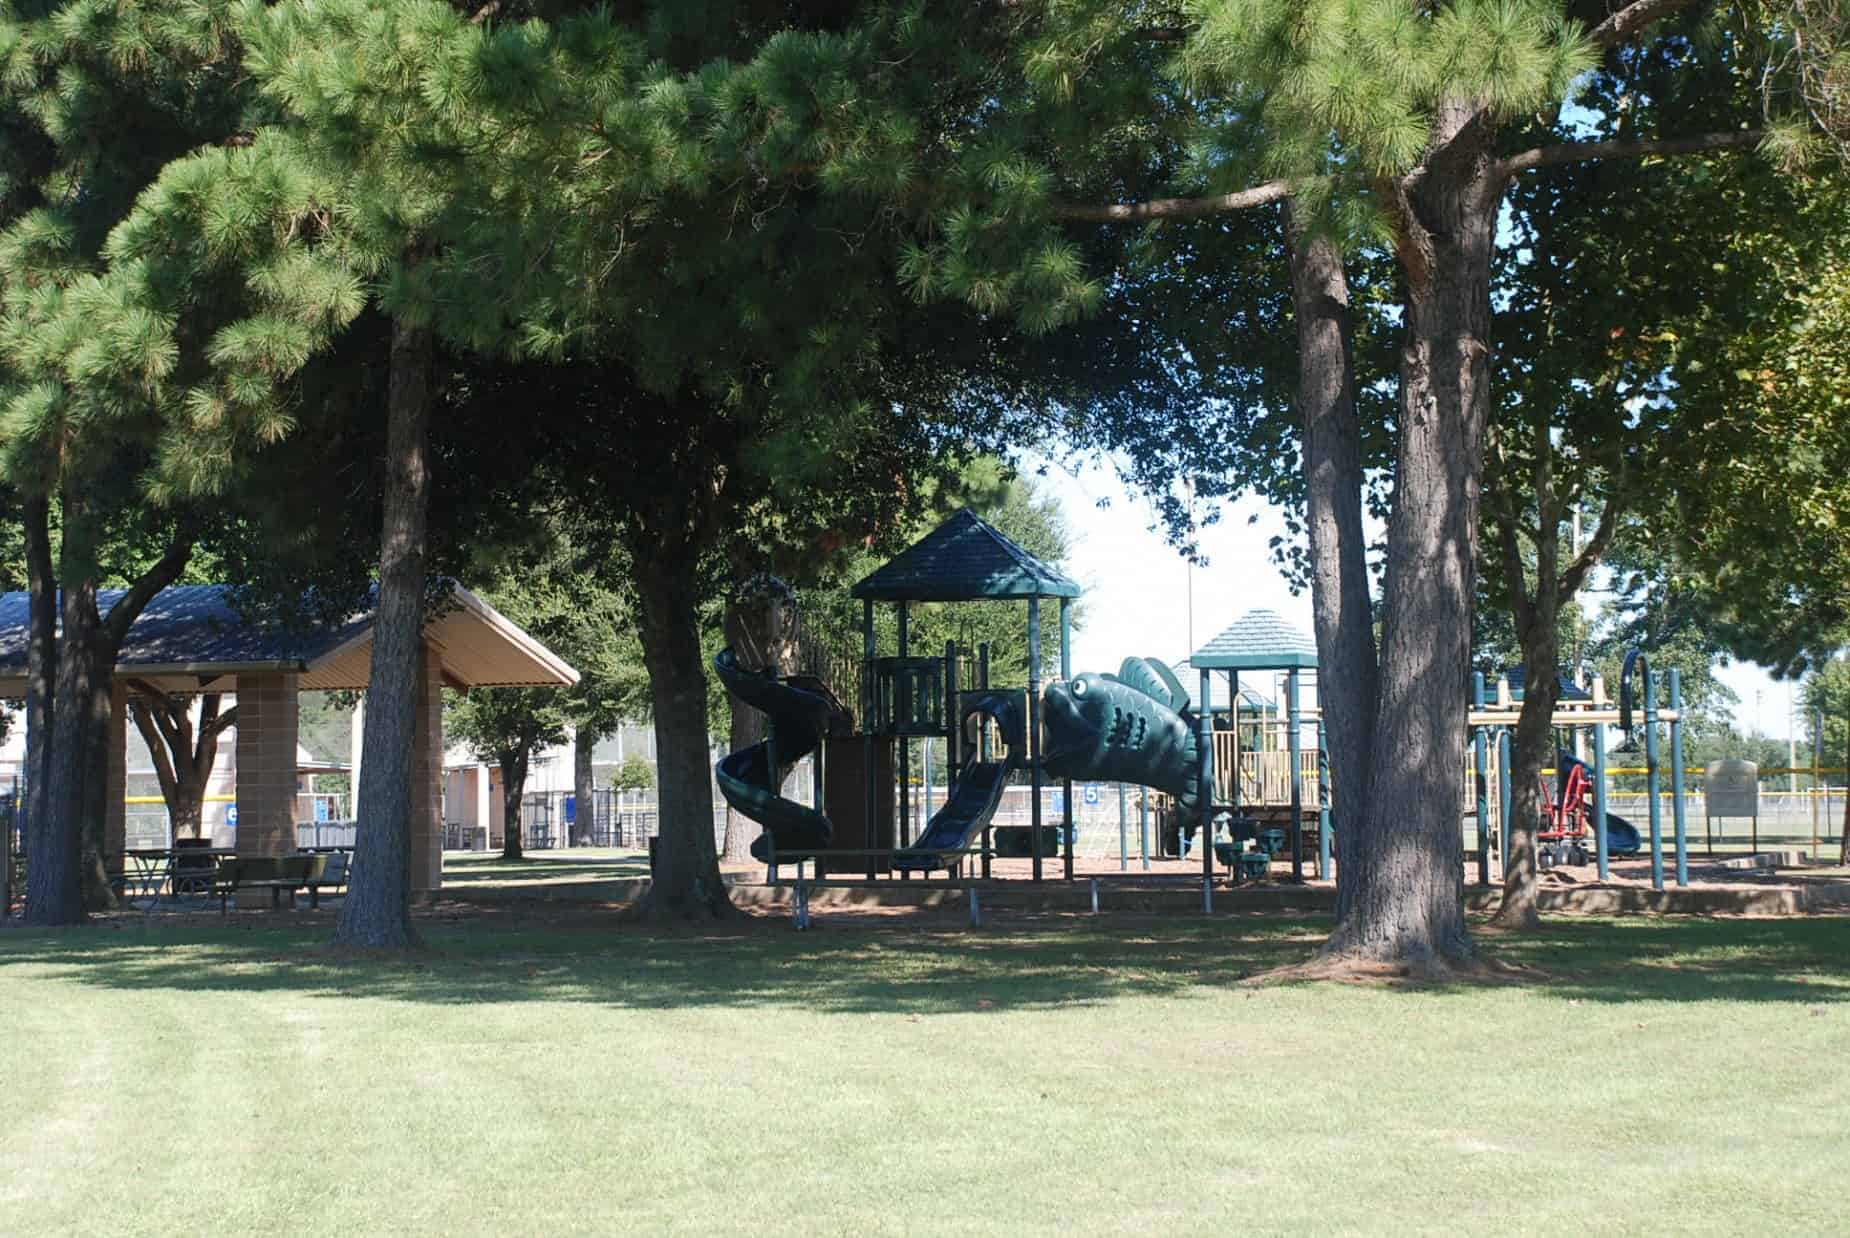 Playground, Picnic Area, Restroom & Concession Building at Softball Fields at Dyess Park